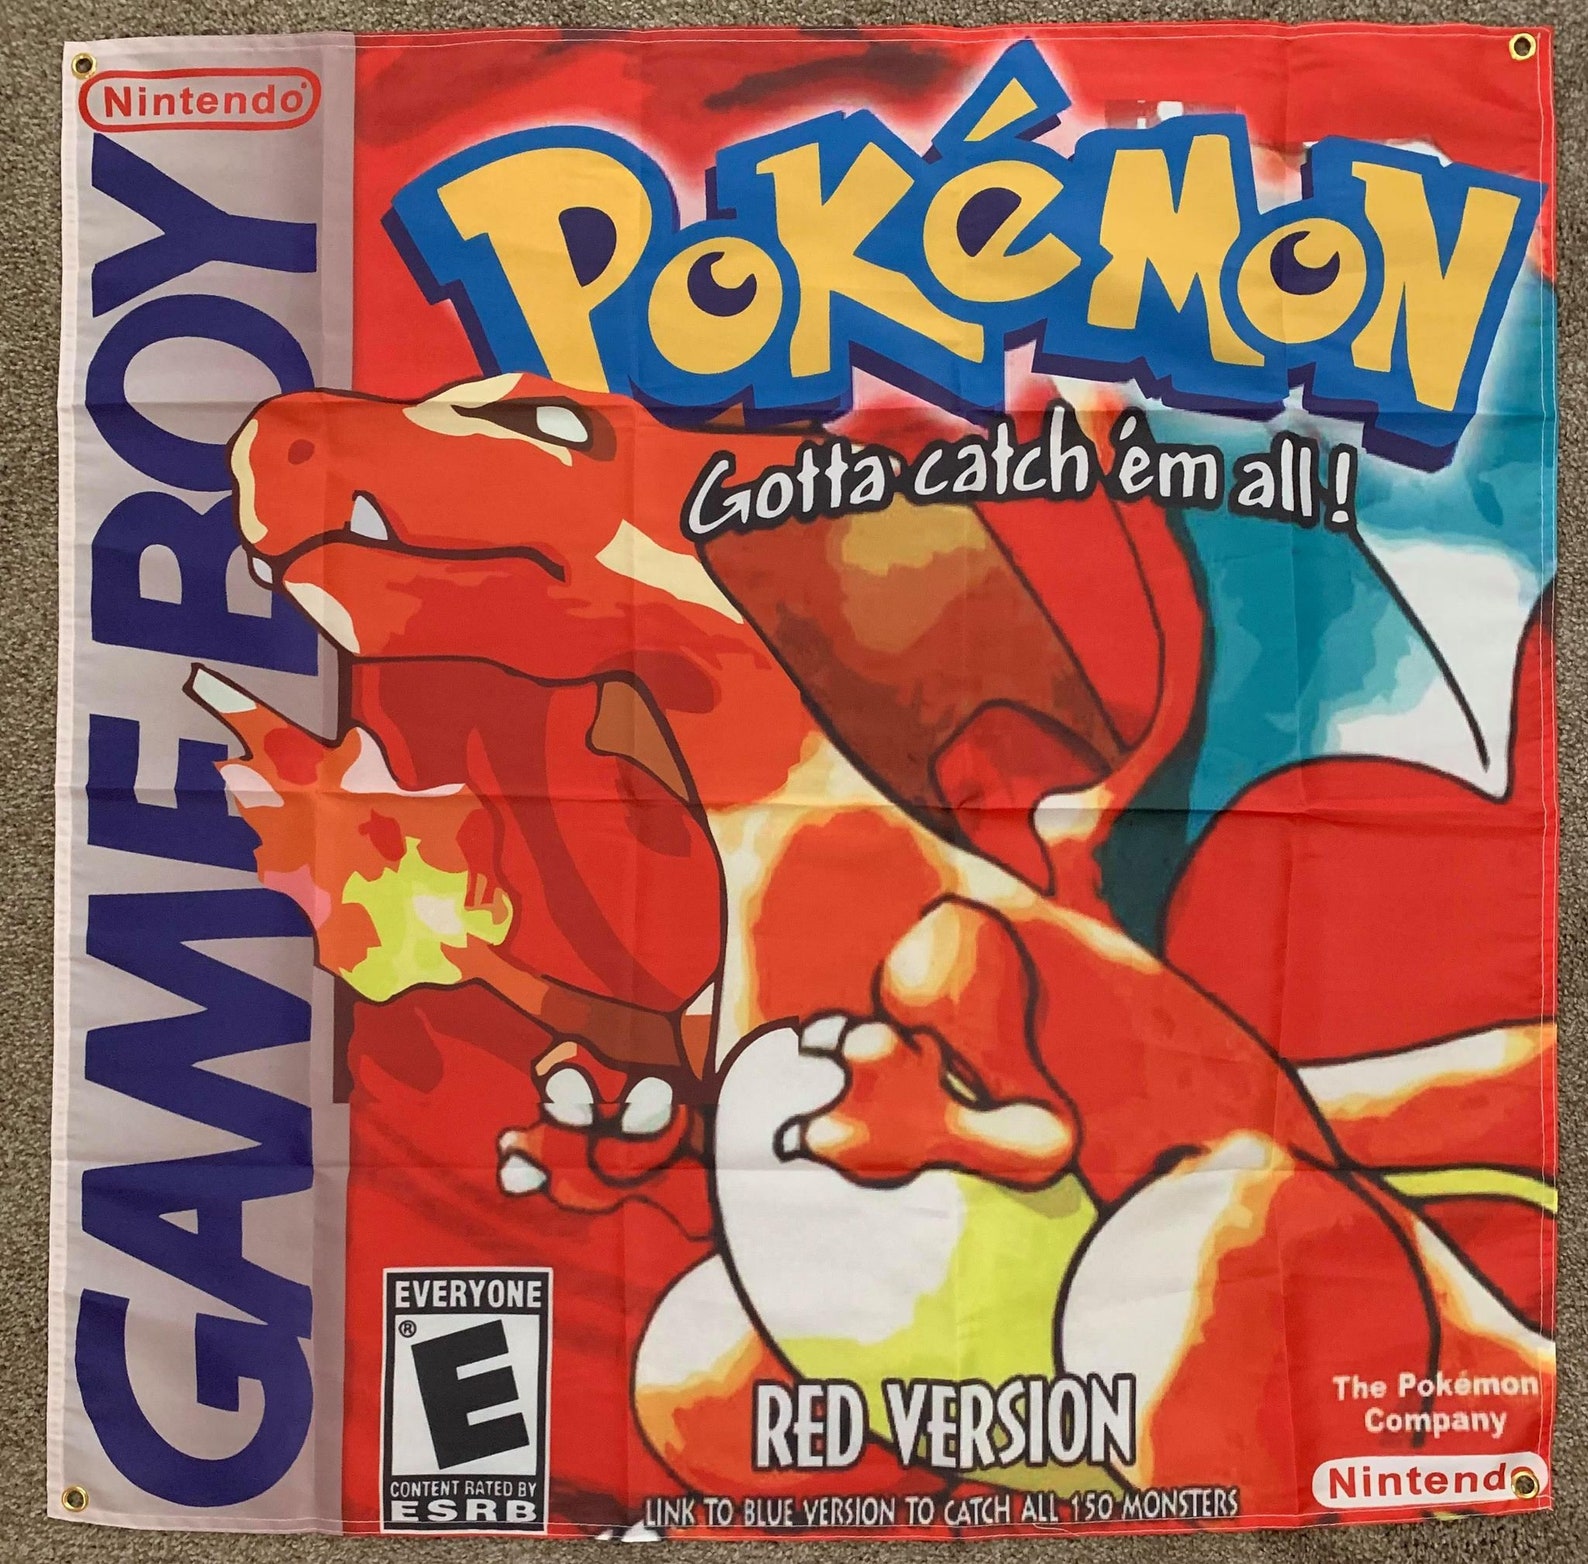 Pokémon Red Version Gameboy Charizard Video Game Cover Art | Etsy